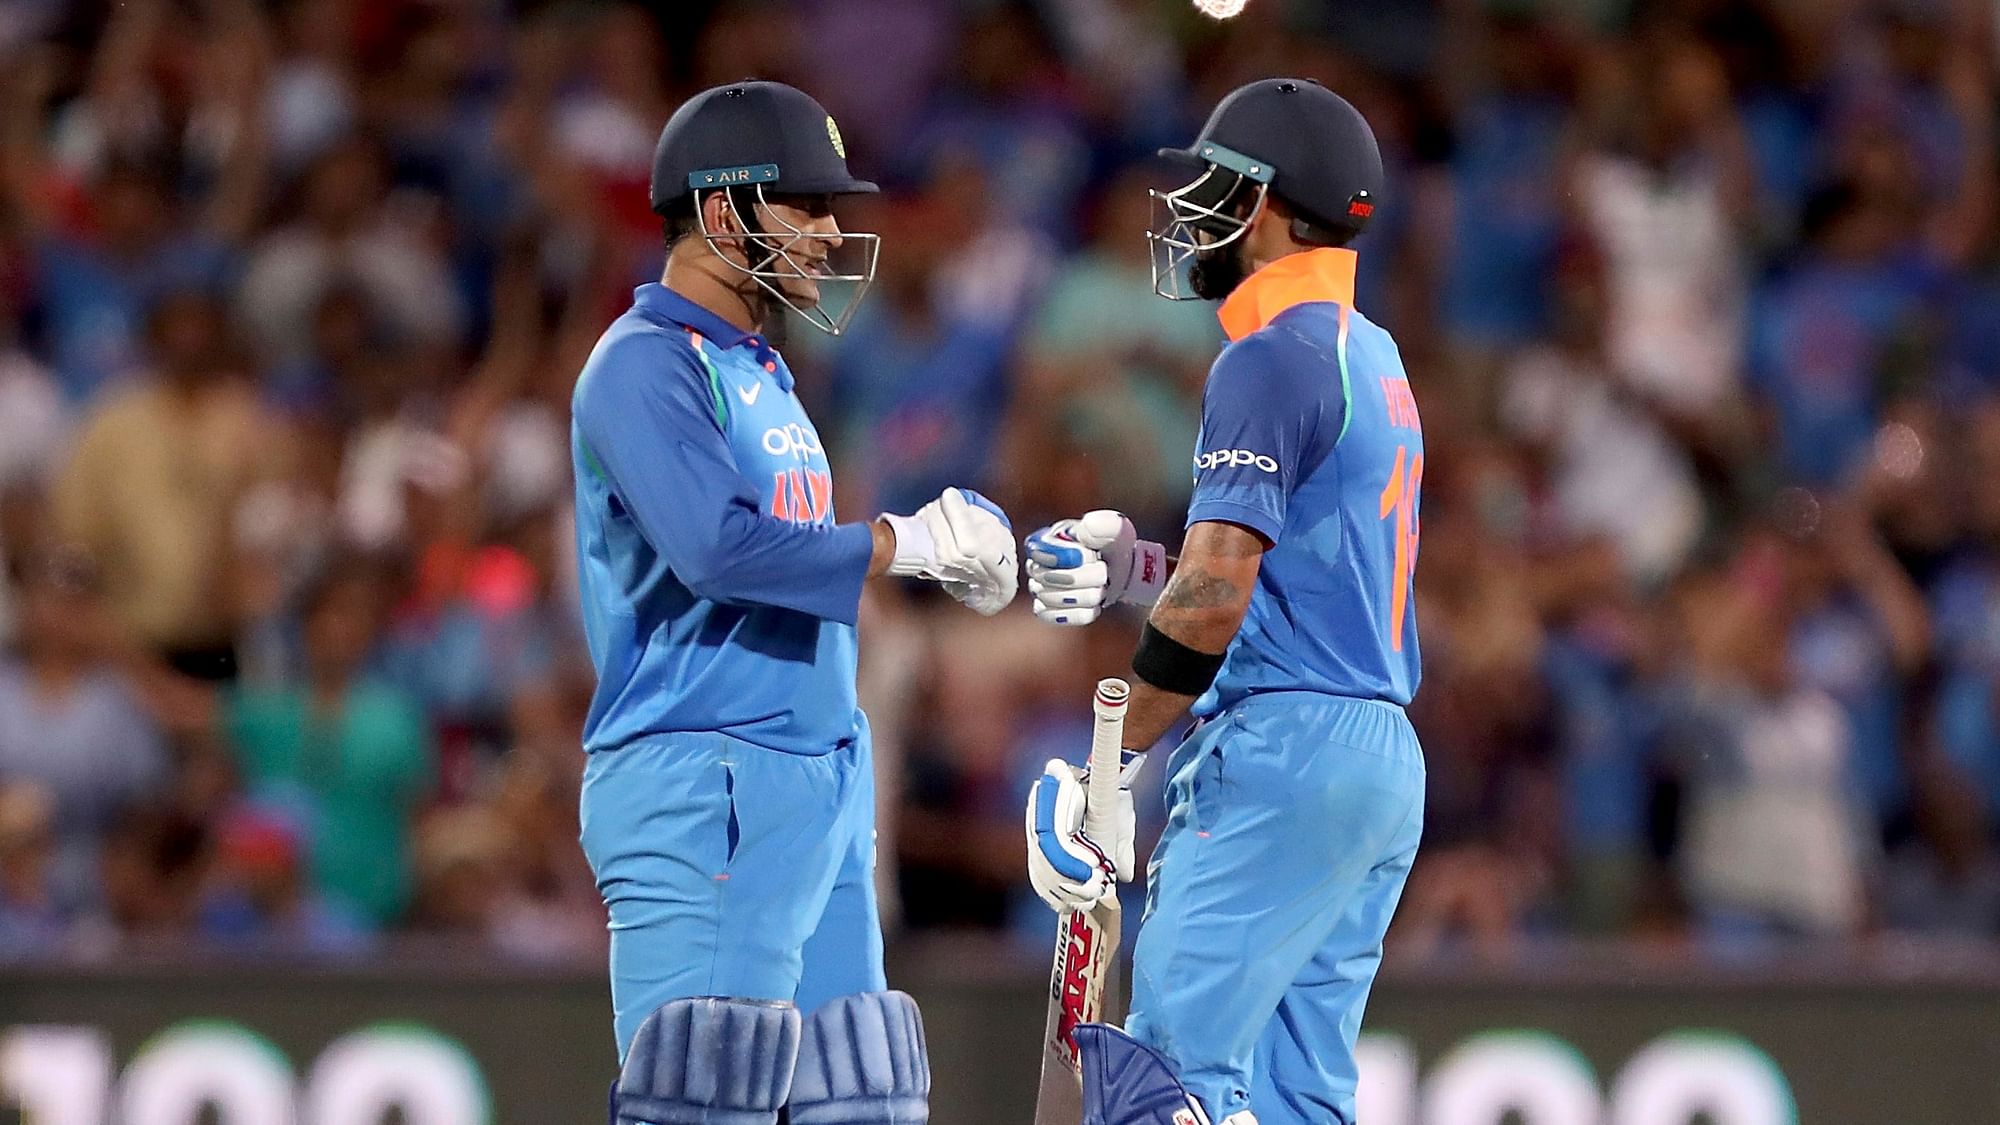 India won the second ODI against Australia by 6 wickets.